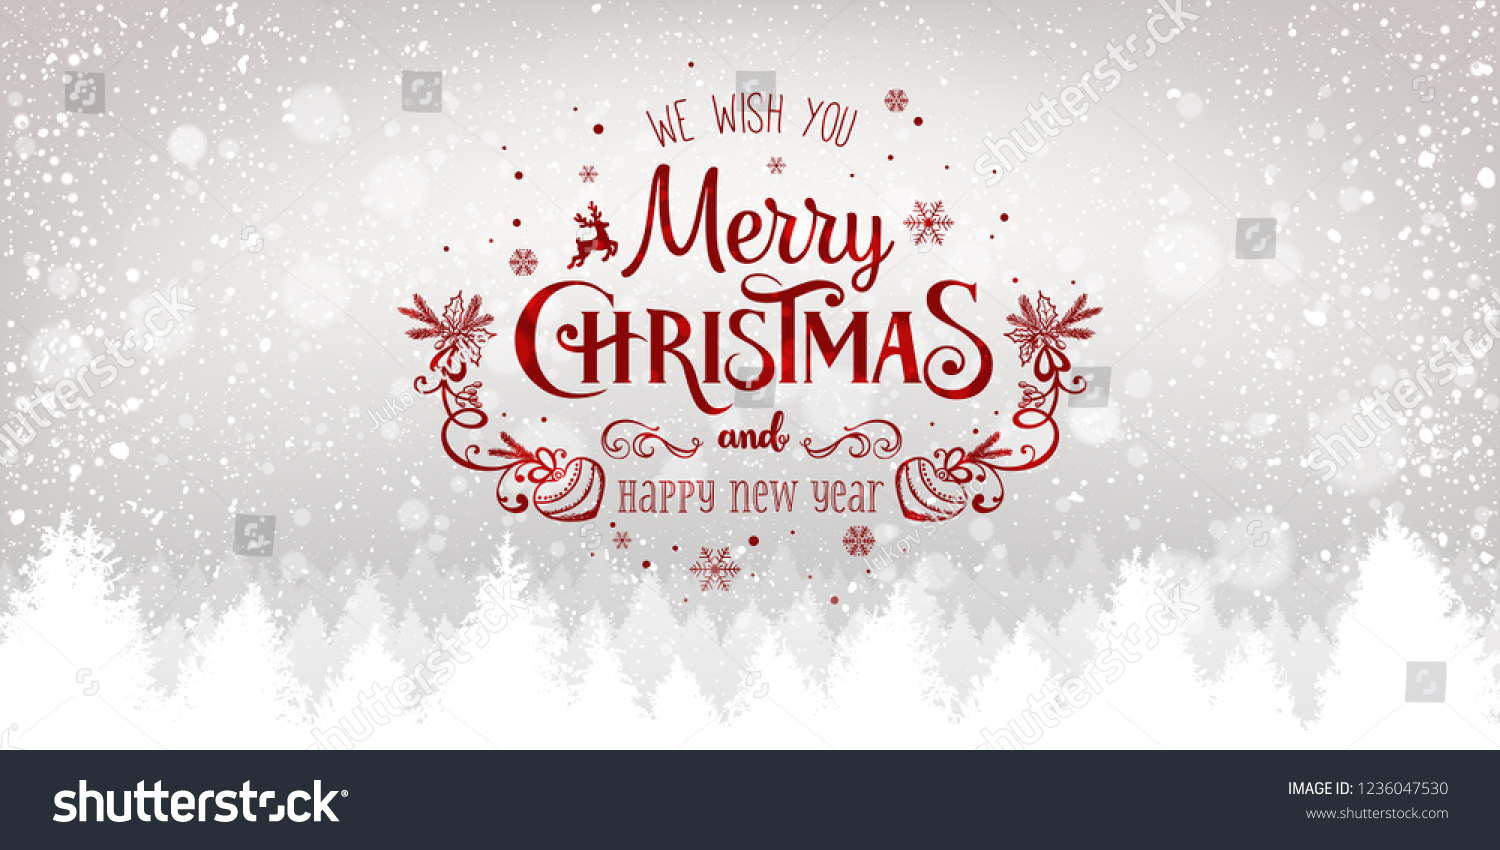 Christmas and New Year Typographical on snowy Xmas background with winter landscape with snowflakes, light, stars. Merry Christmas card. Vector Illustration #1236047530